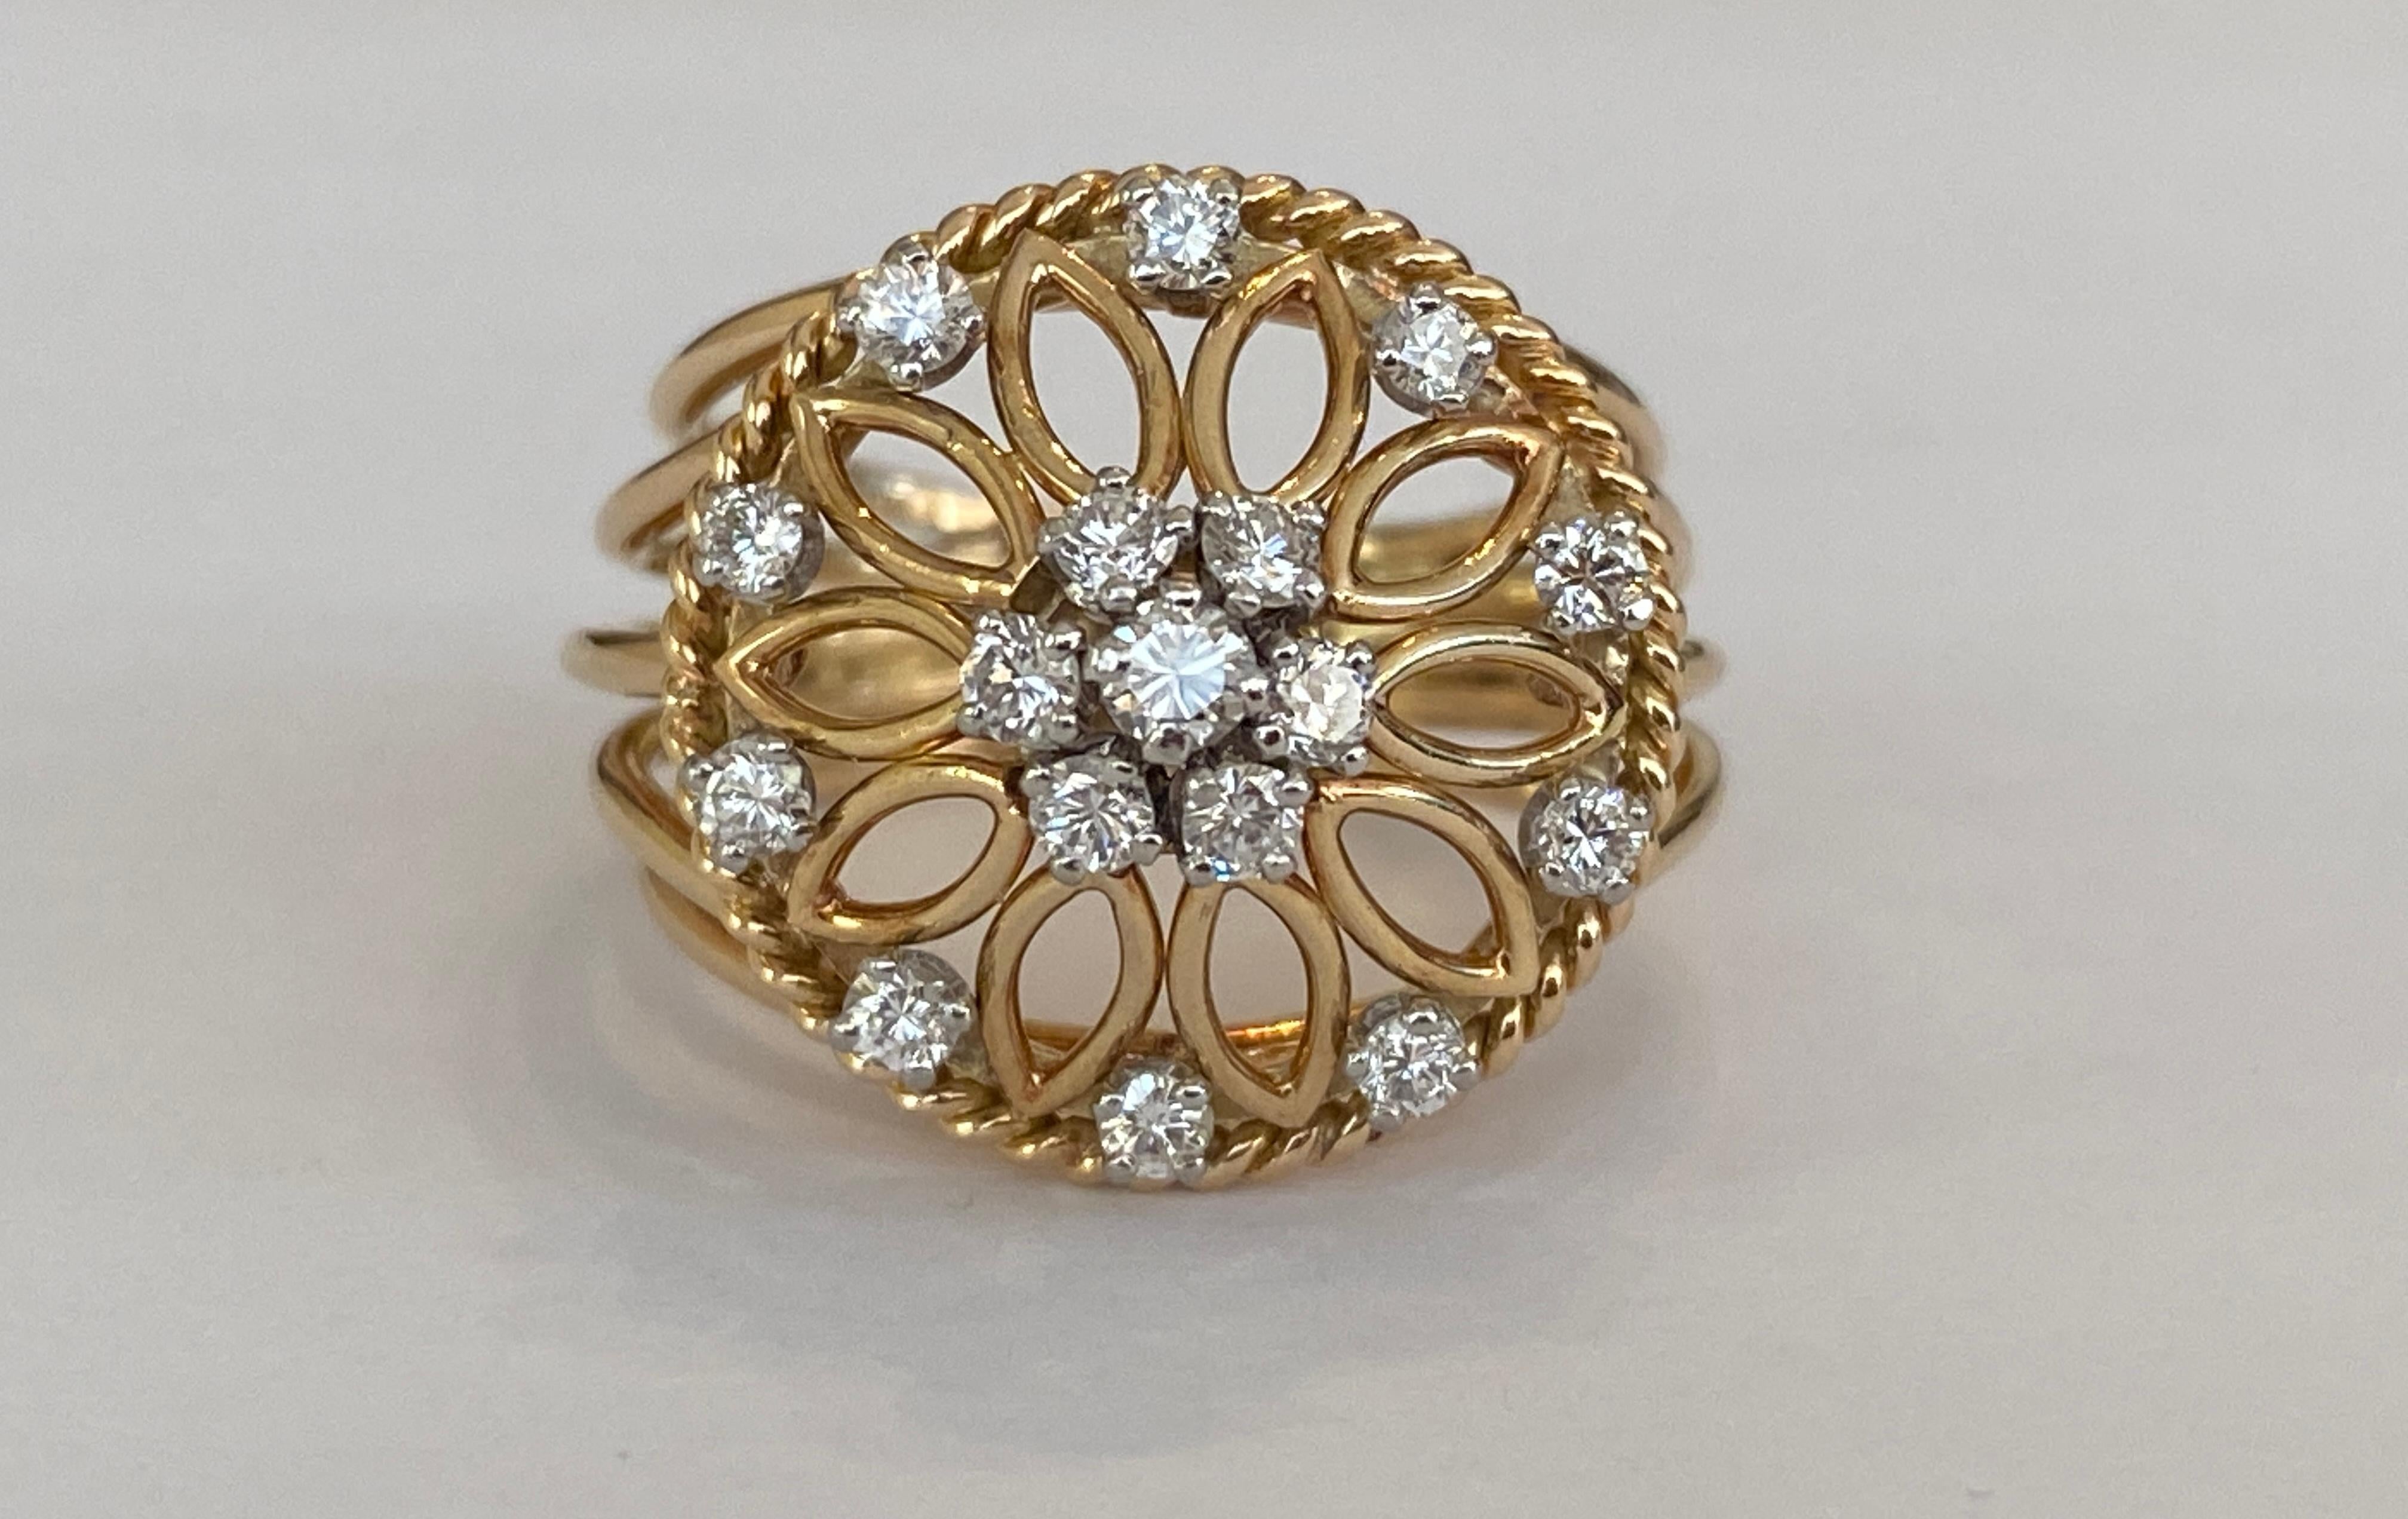 Offered: 18 kt yellow gold cocktail ring, 1950s. The ring is made of wire and set with 17 pieces of brilliant cut diamonds with a total weight of approx. 0.55 ct, quality H/VS.
Weight: 9 grams
16 pieces brilliant cut diamonds approx. 0.49 crt
1